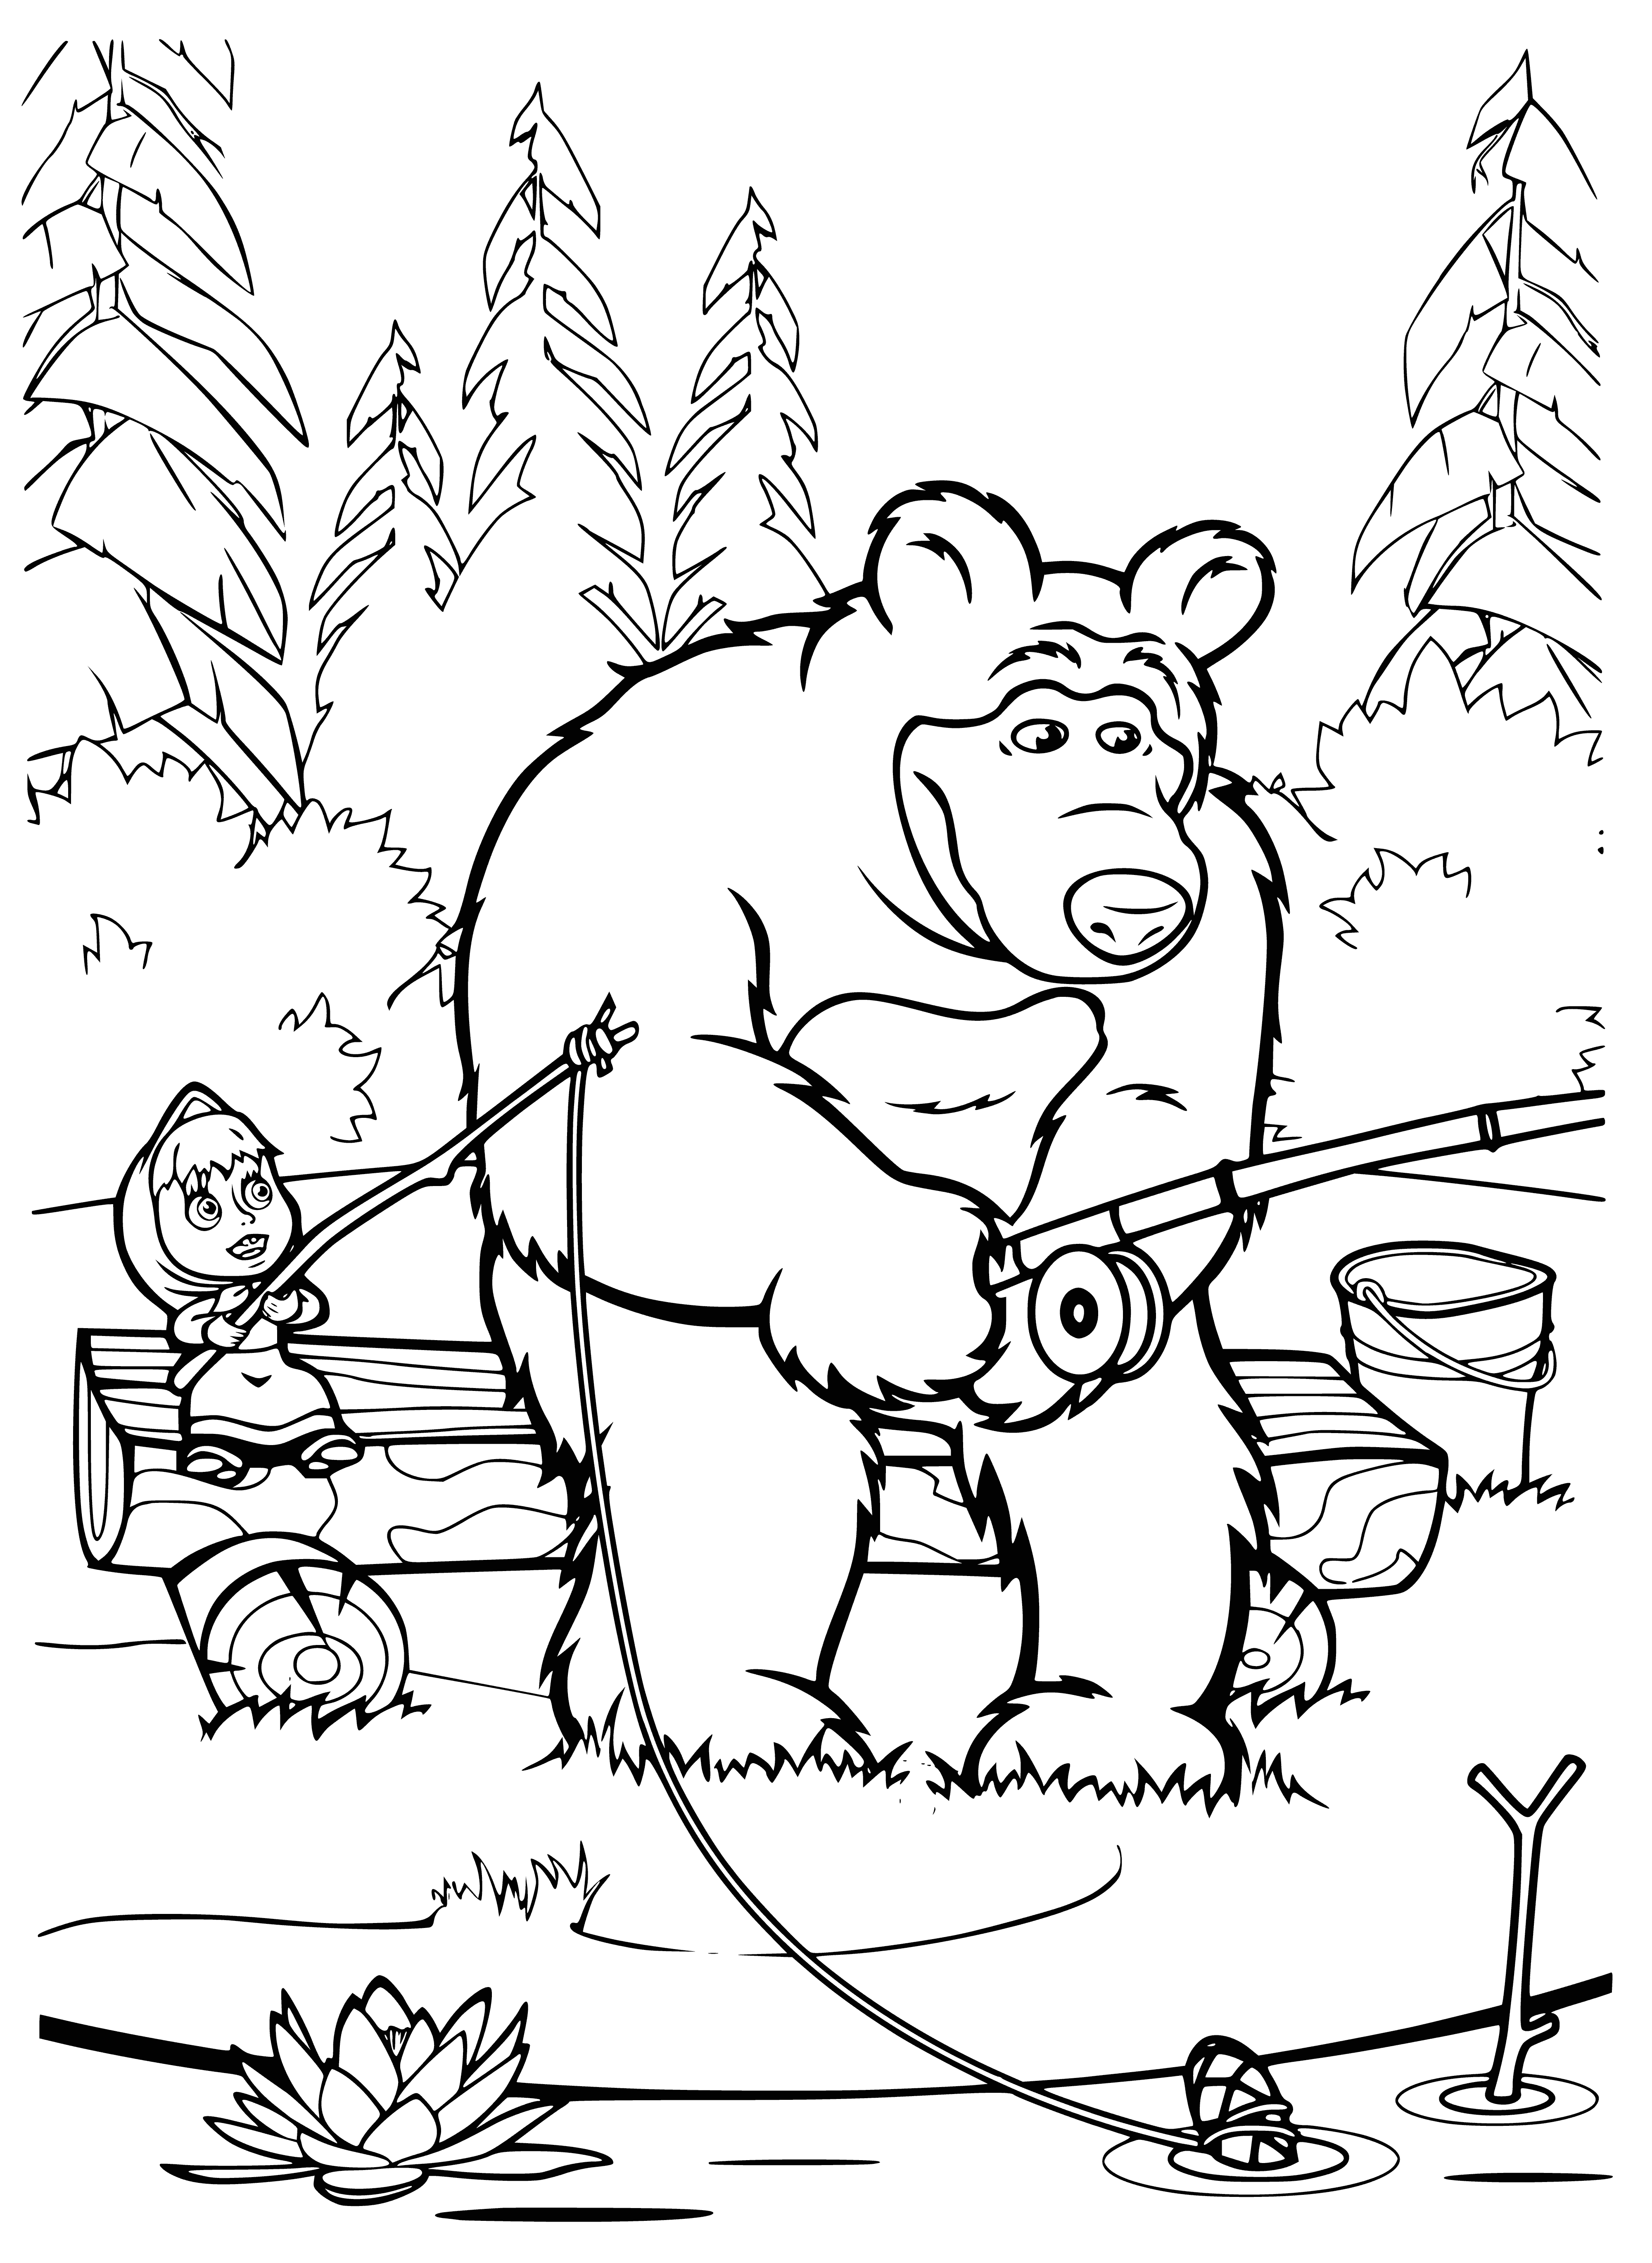 coloring page: Masha plays with her stick and string-attached object near a tree & pond; a relaxingly entertaining afternoon.